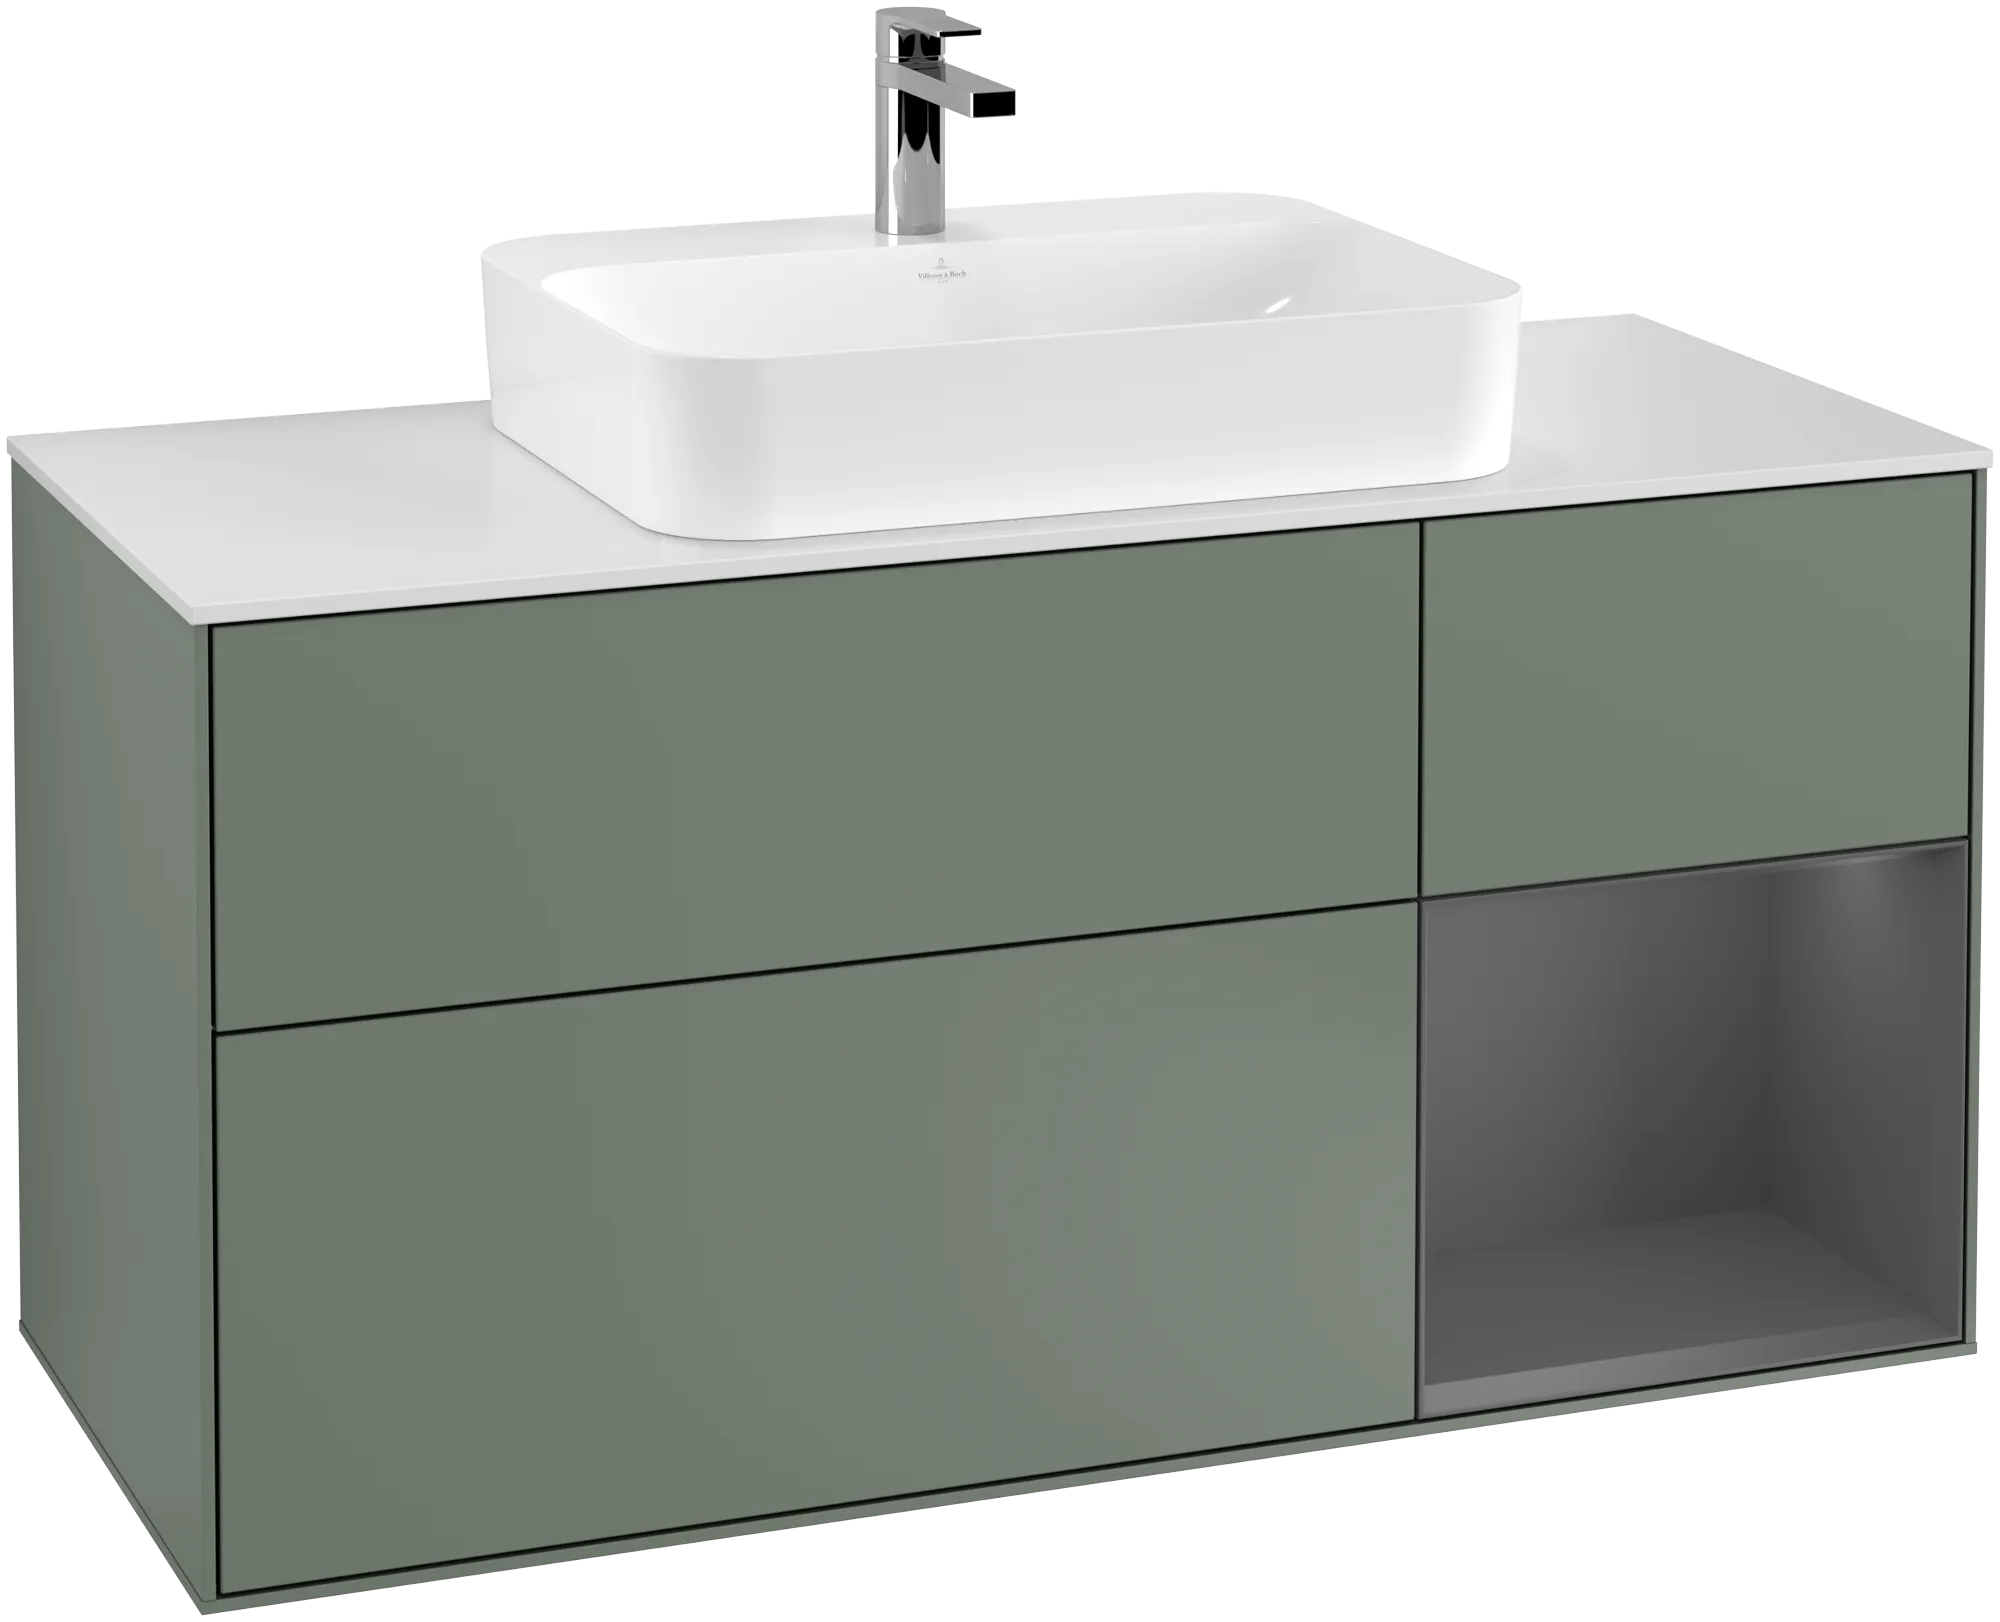 Obrázek VILLEROY BOCH Finion Vanity unit, with lighting, 3 pull-out compartments, 1200 x 603 x 501 mm, Olive Matt Lacquer / Anthracite Matt Lacquer / Glass White Matt #G421GKGM